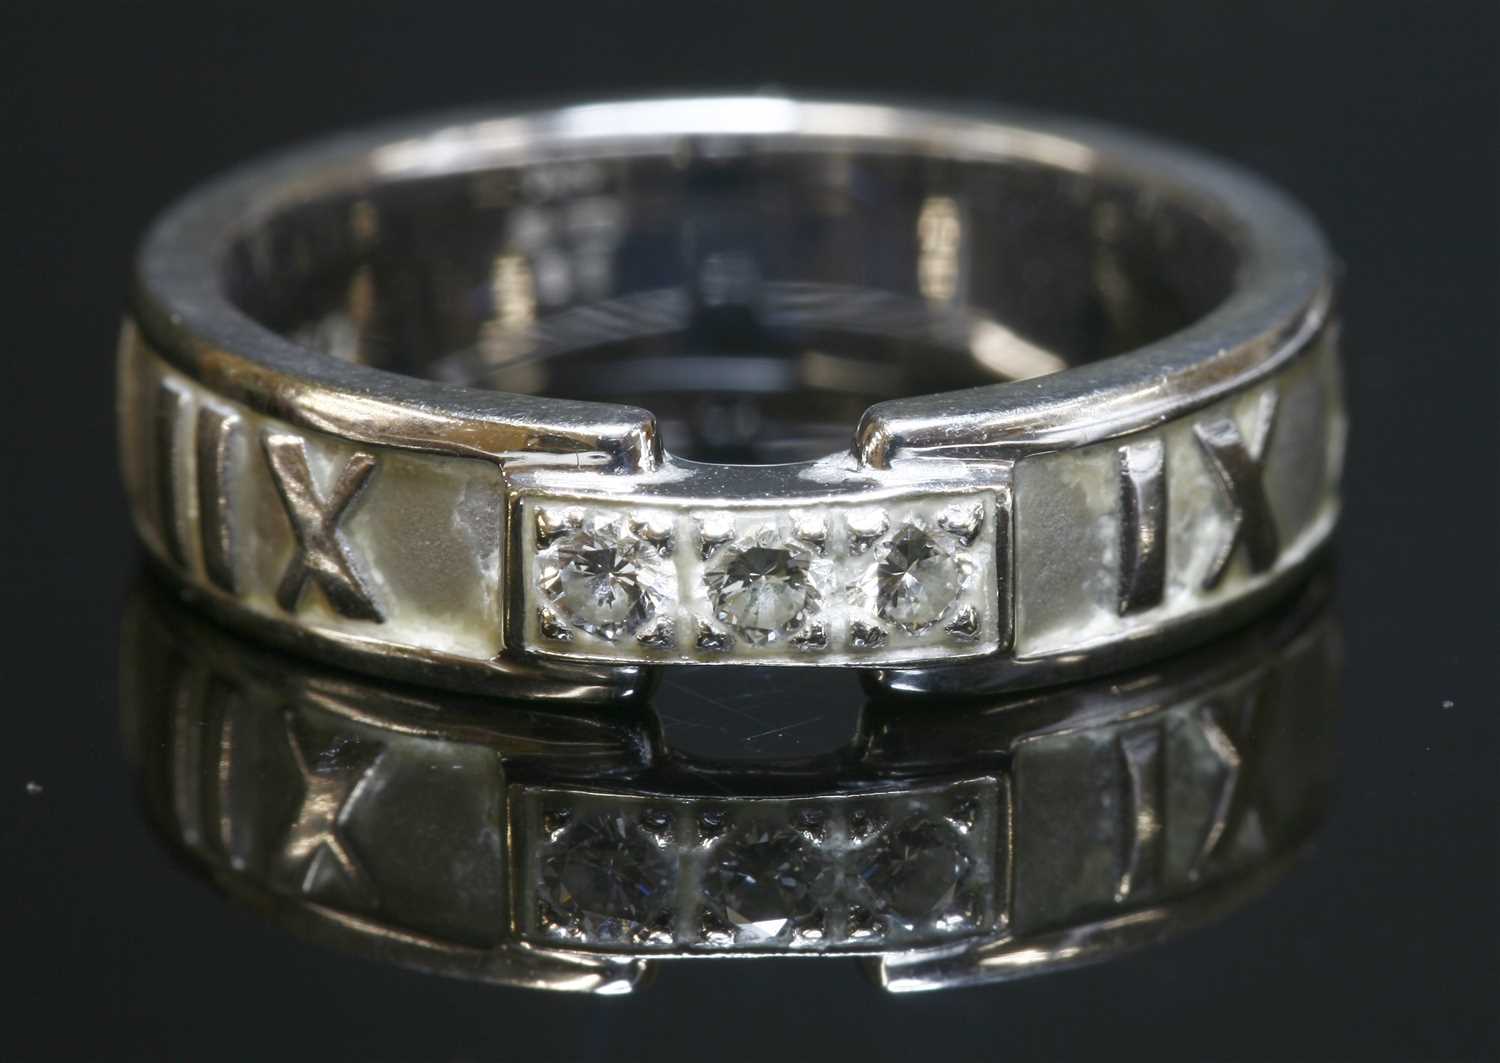 Lot 73 - An 18ct white gold Atlas ring by Tiffany & Co